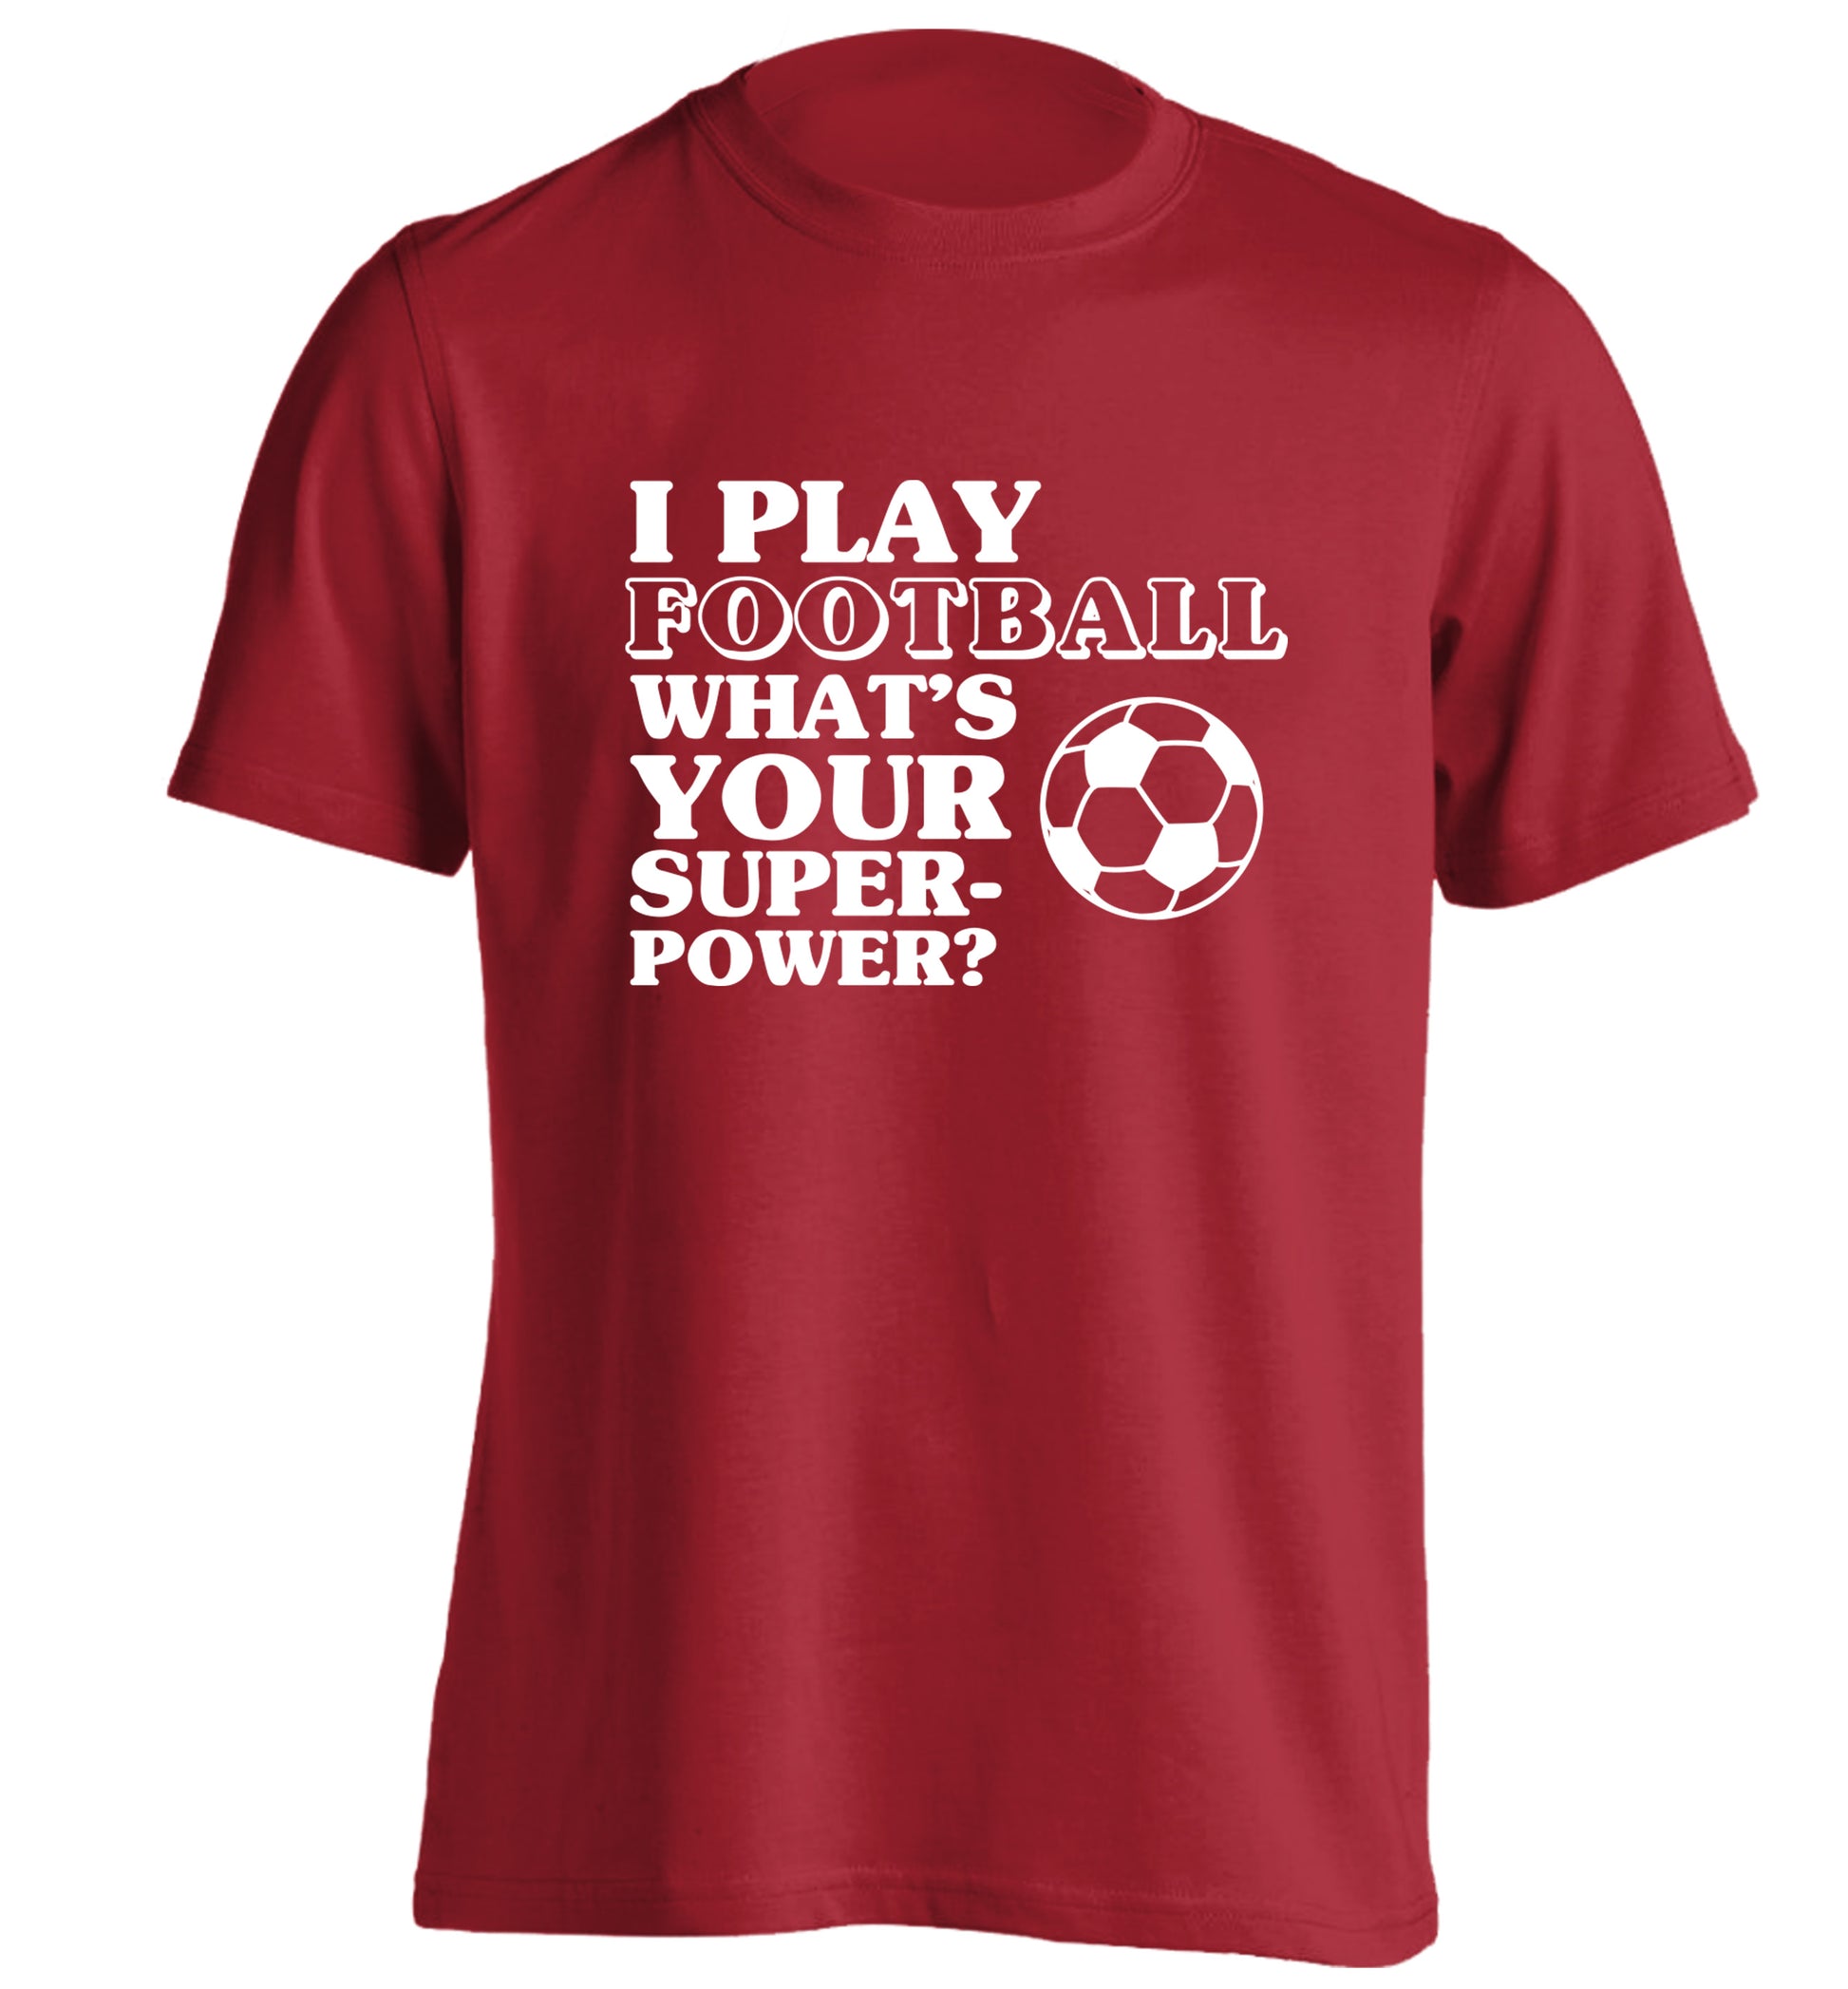 I play football what's your superpower? adults unisexred Tshirt 2XL